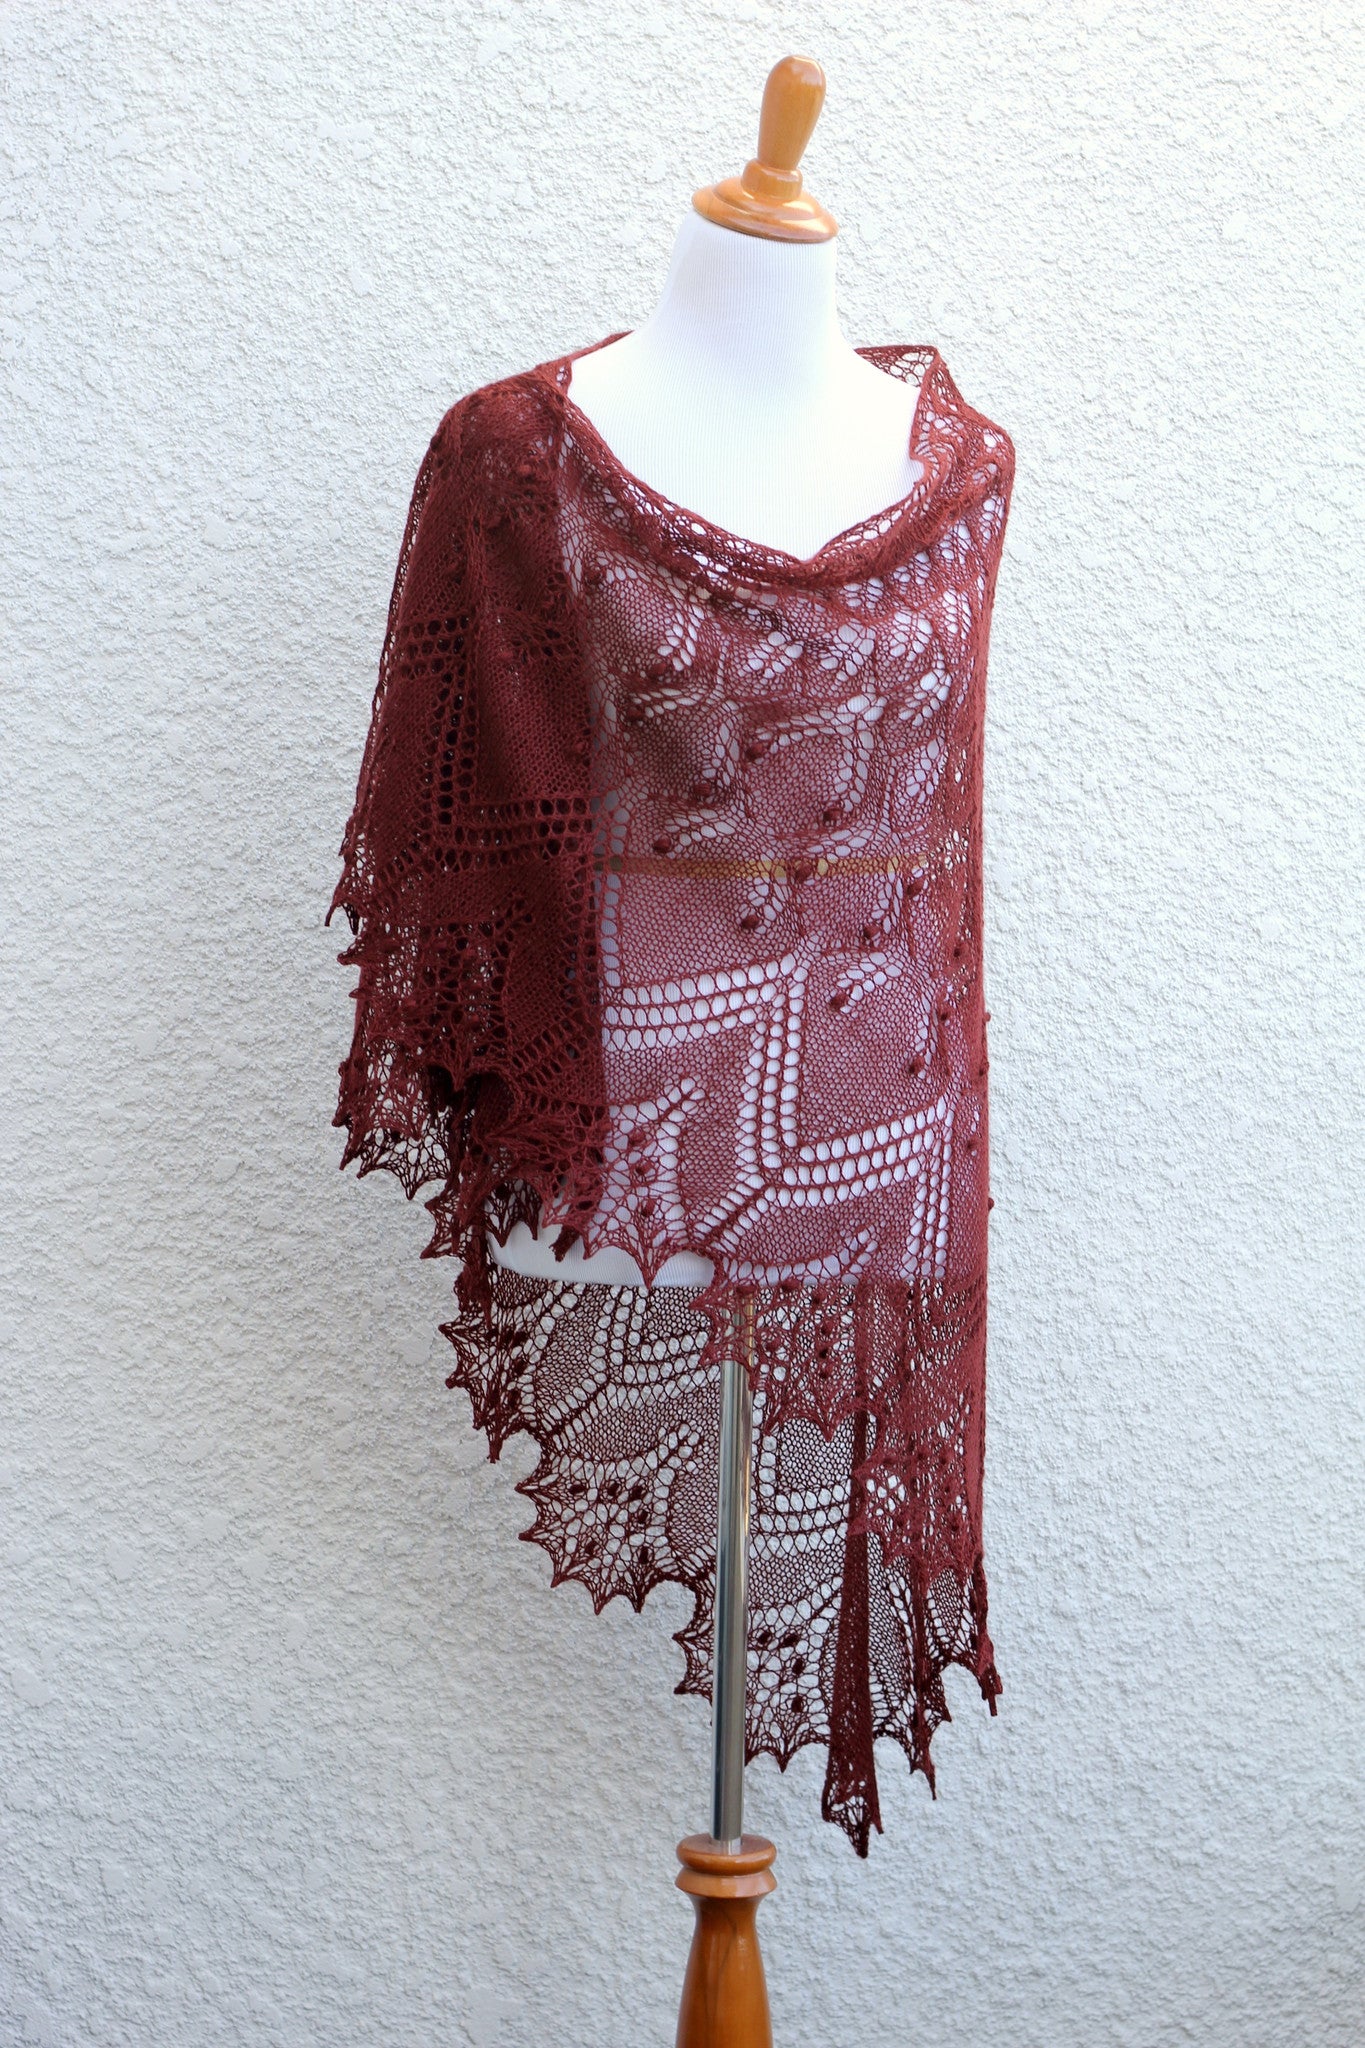 Knit lace shawl in brown coffee color with nupps